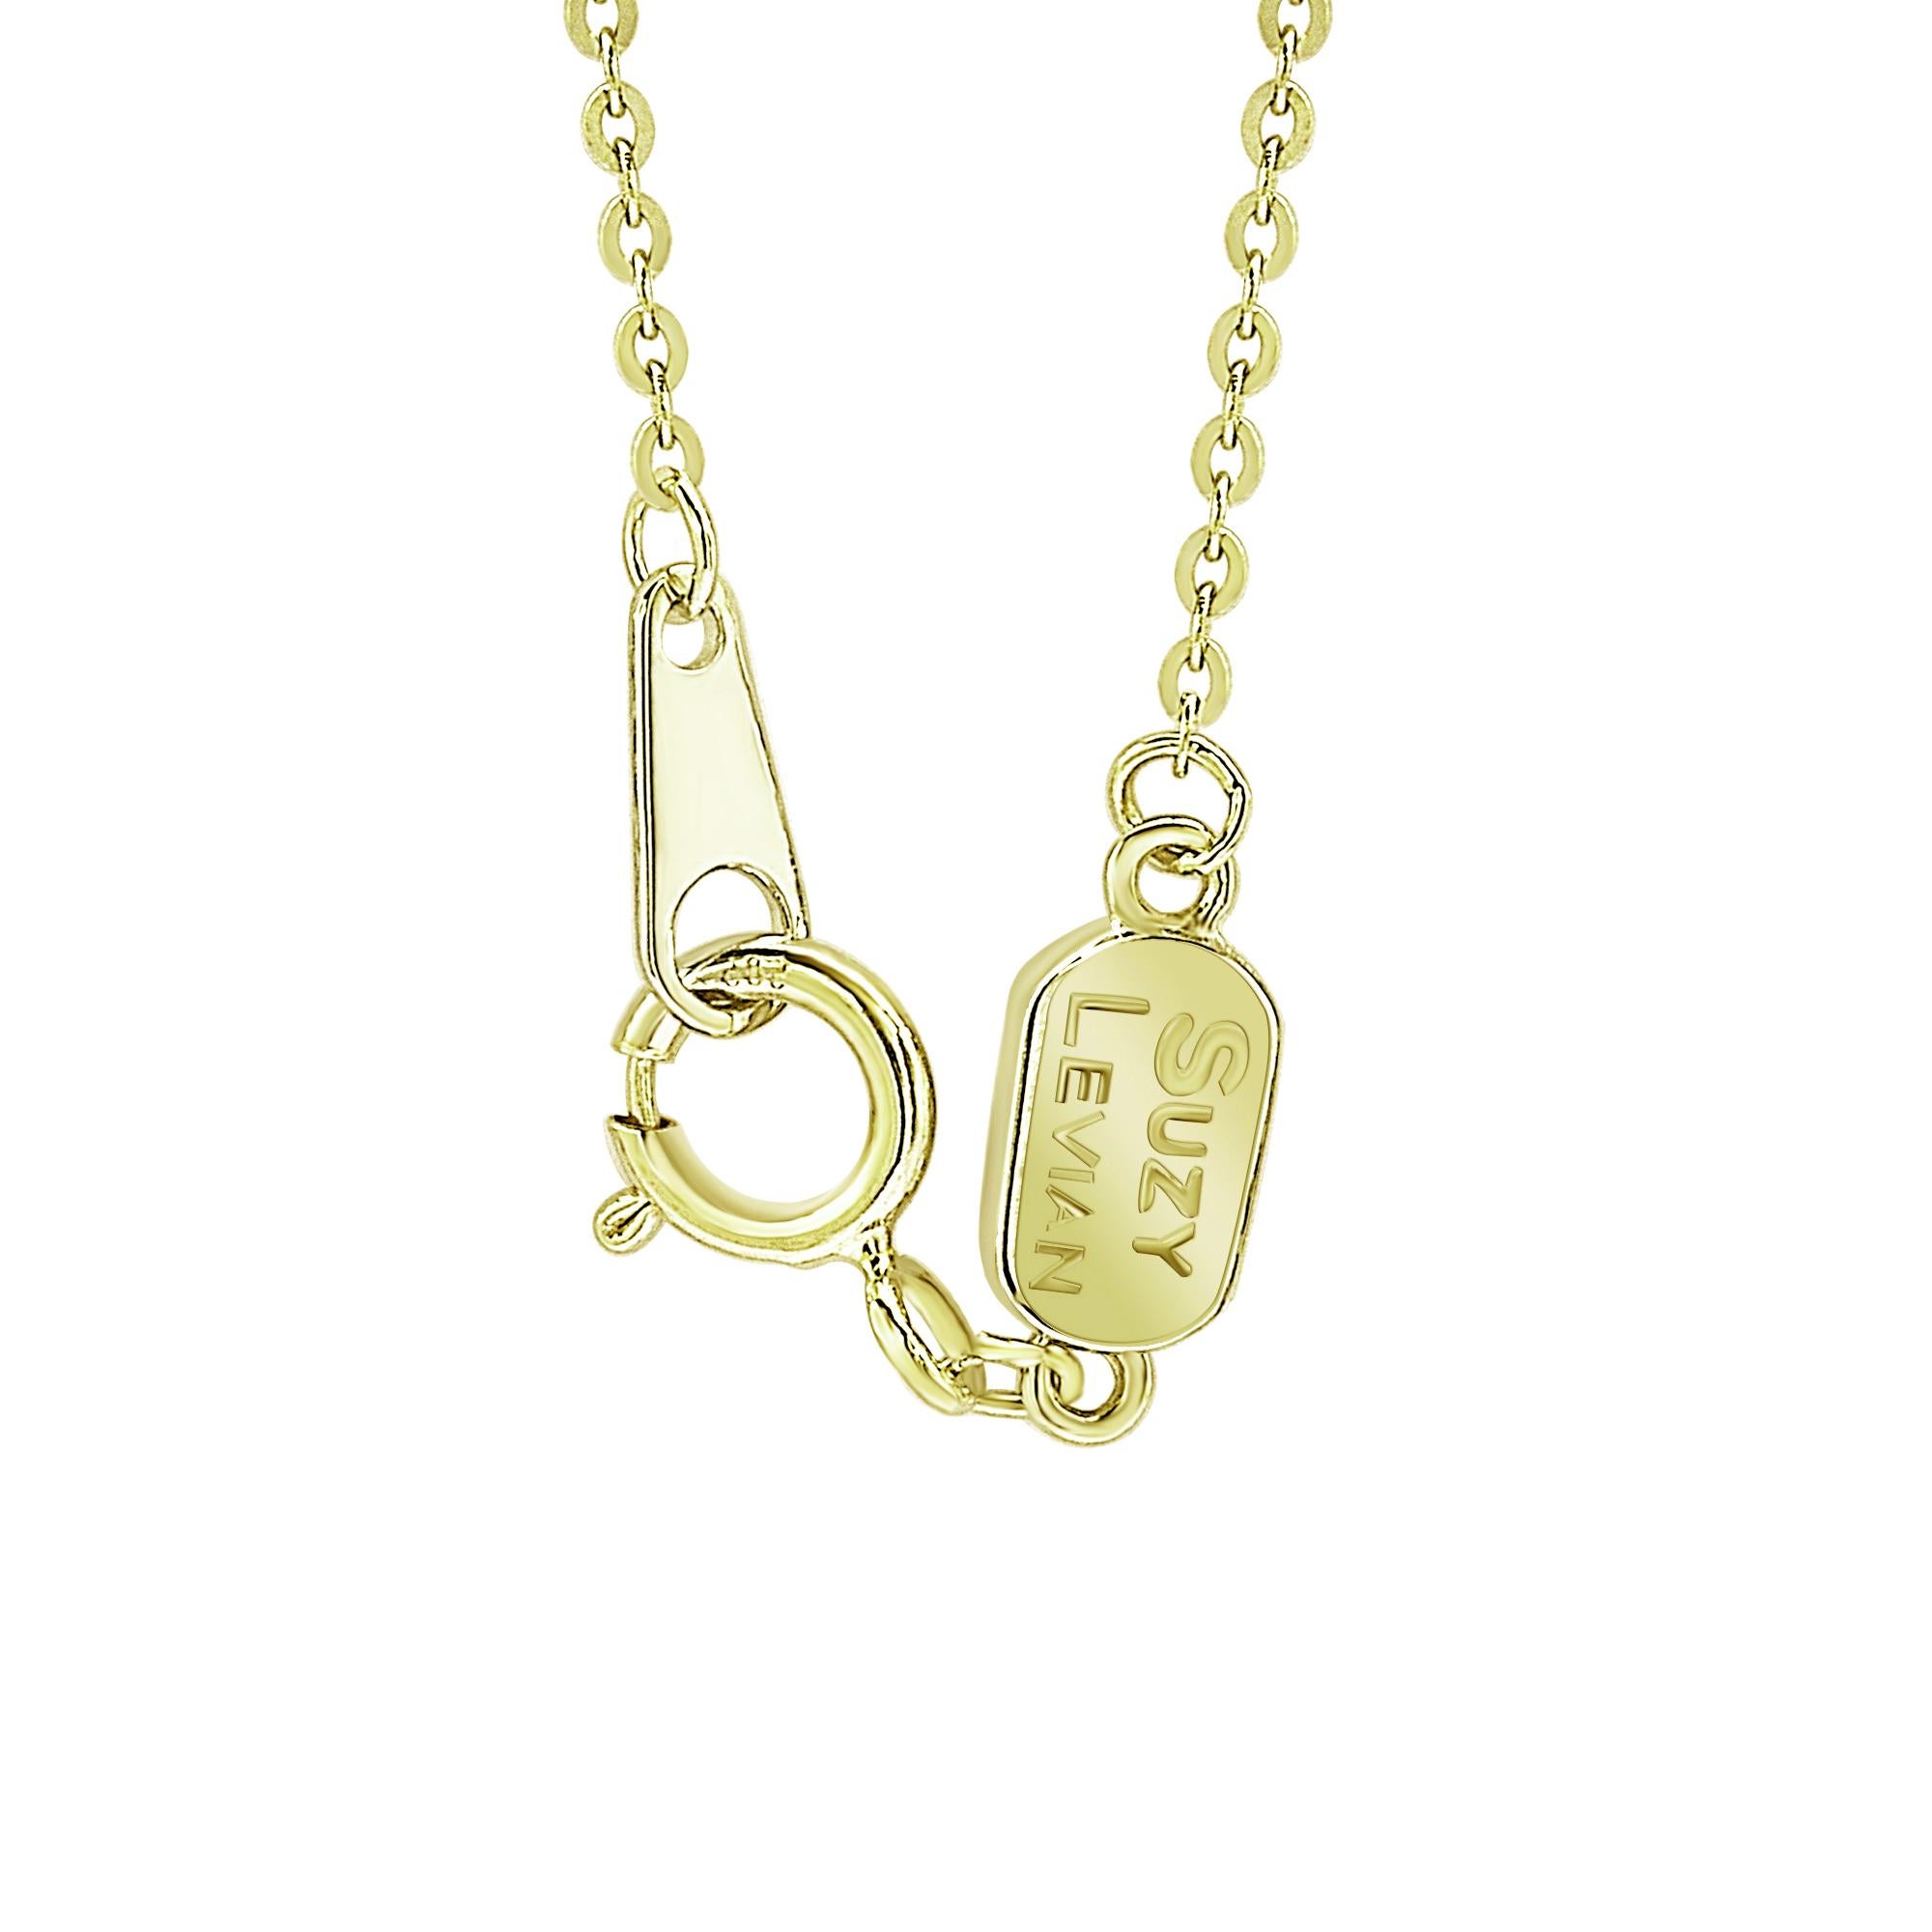 Contemporary Suzy Levian 14K Yellow Gold 1.33 Carat White Diamond Station Necklace For Sale